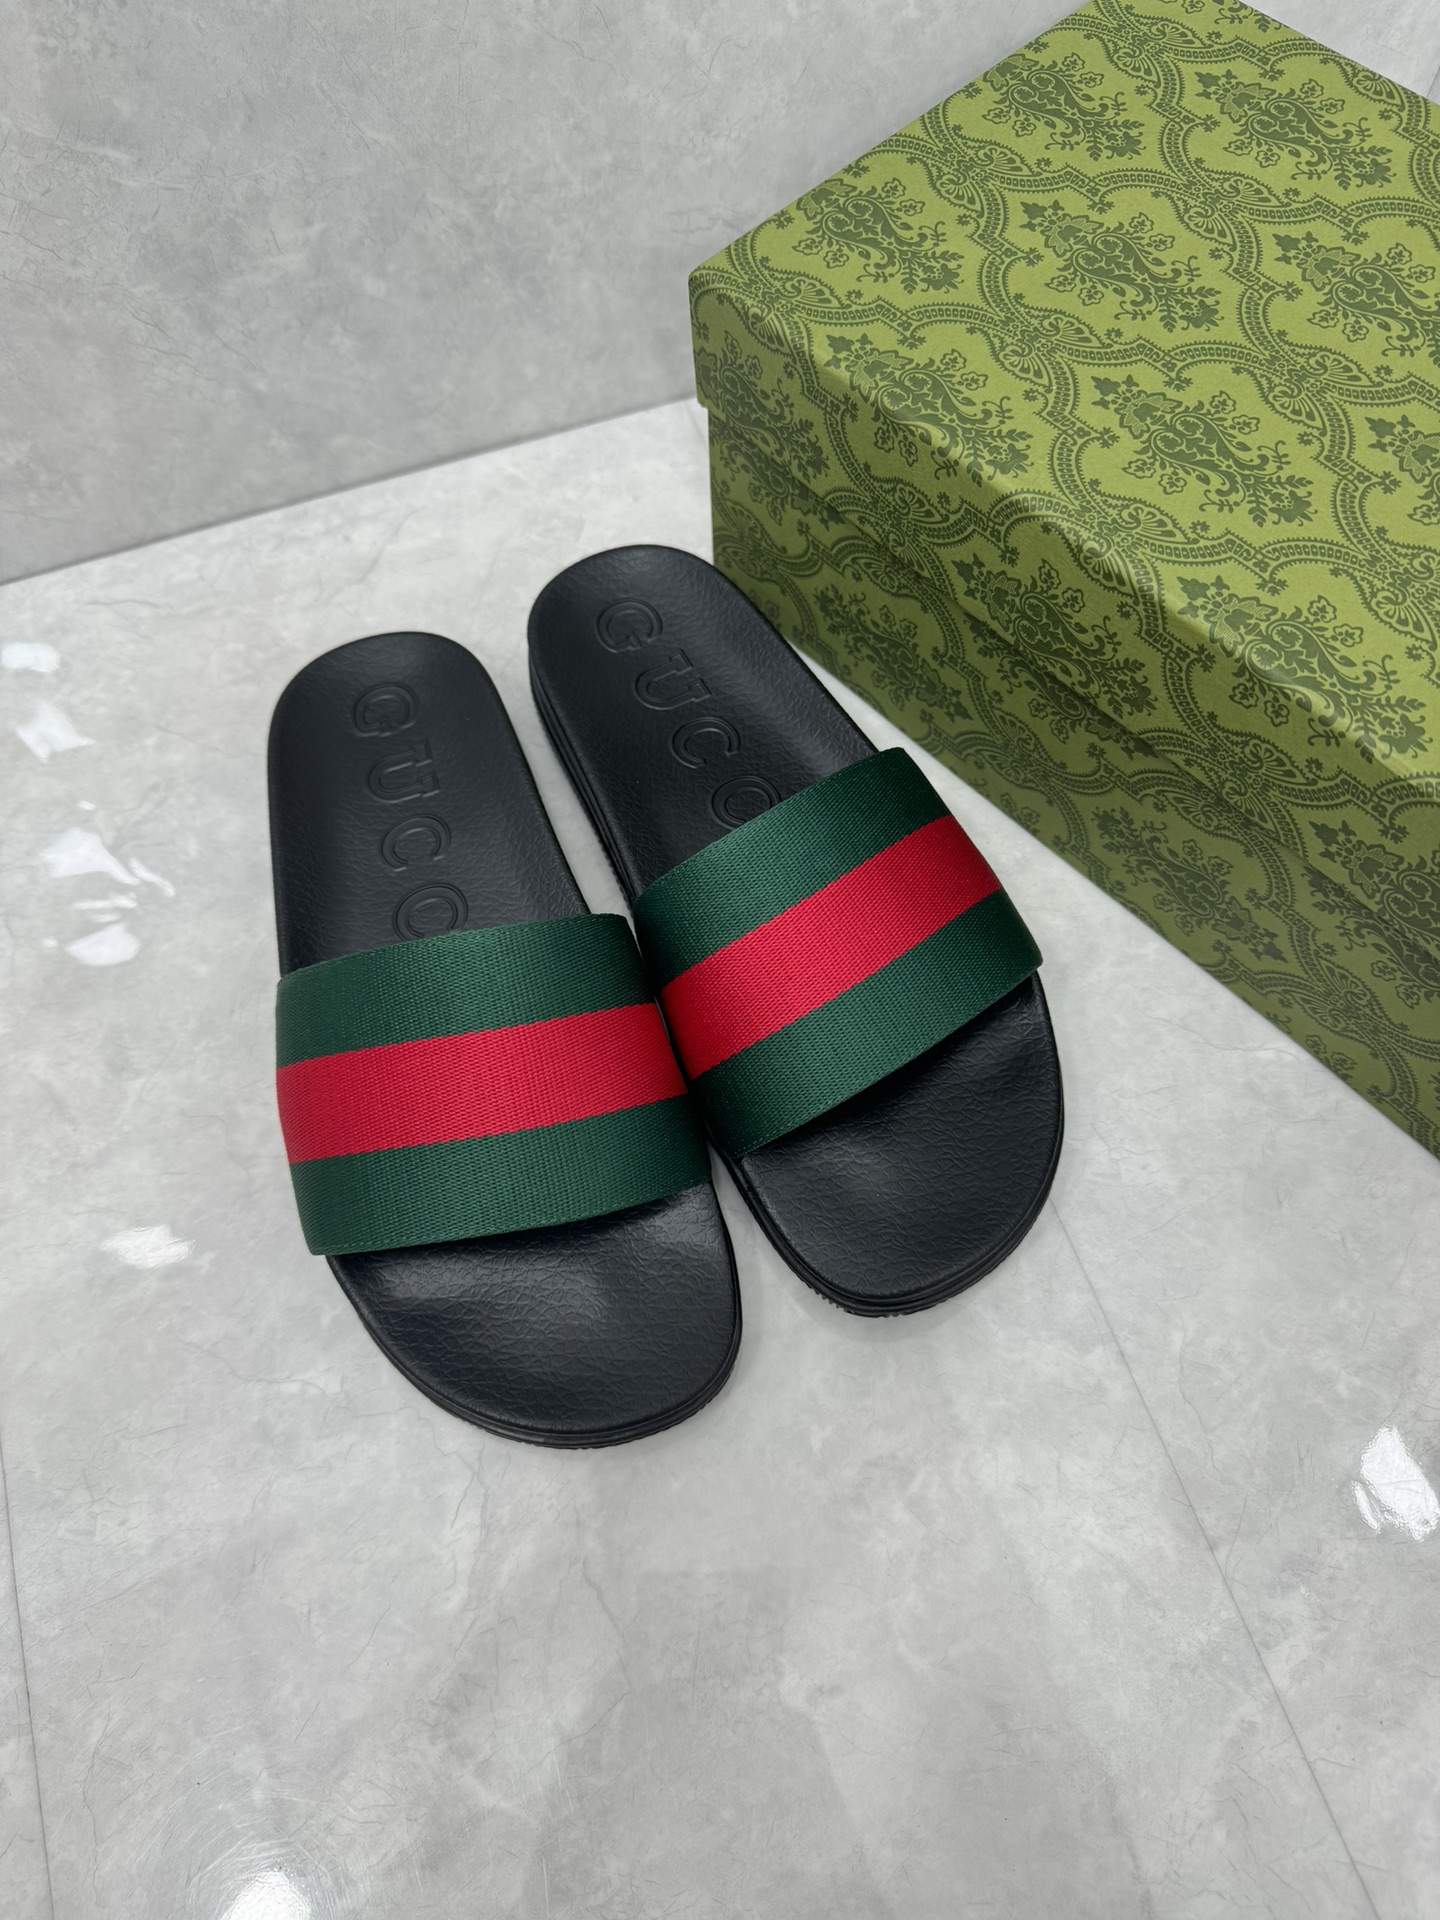 Gucci Shoes Sandals Slippers Best Luxury Replica
 Green Red Unisex Rubber Sweatpants